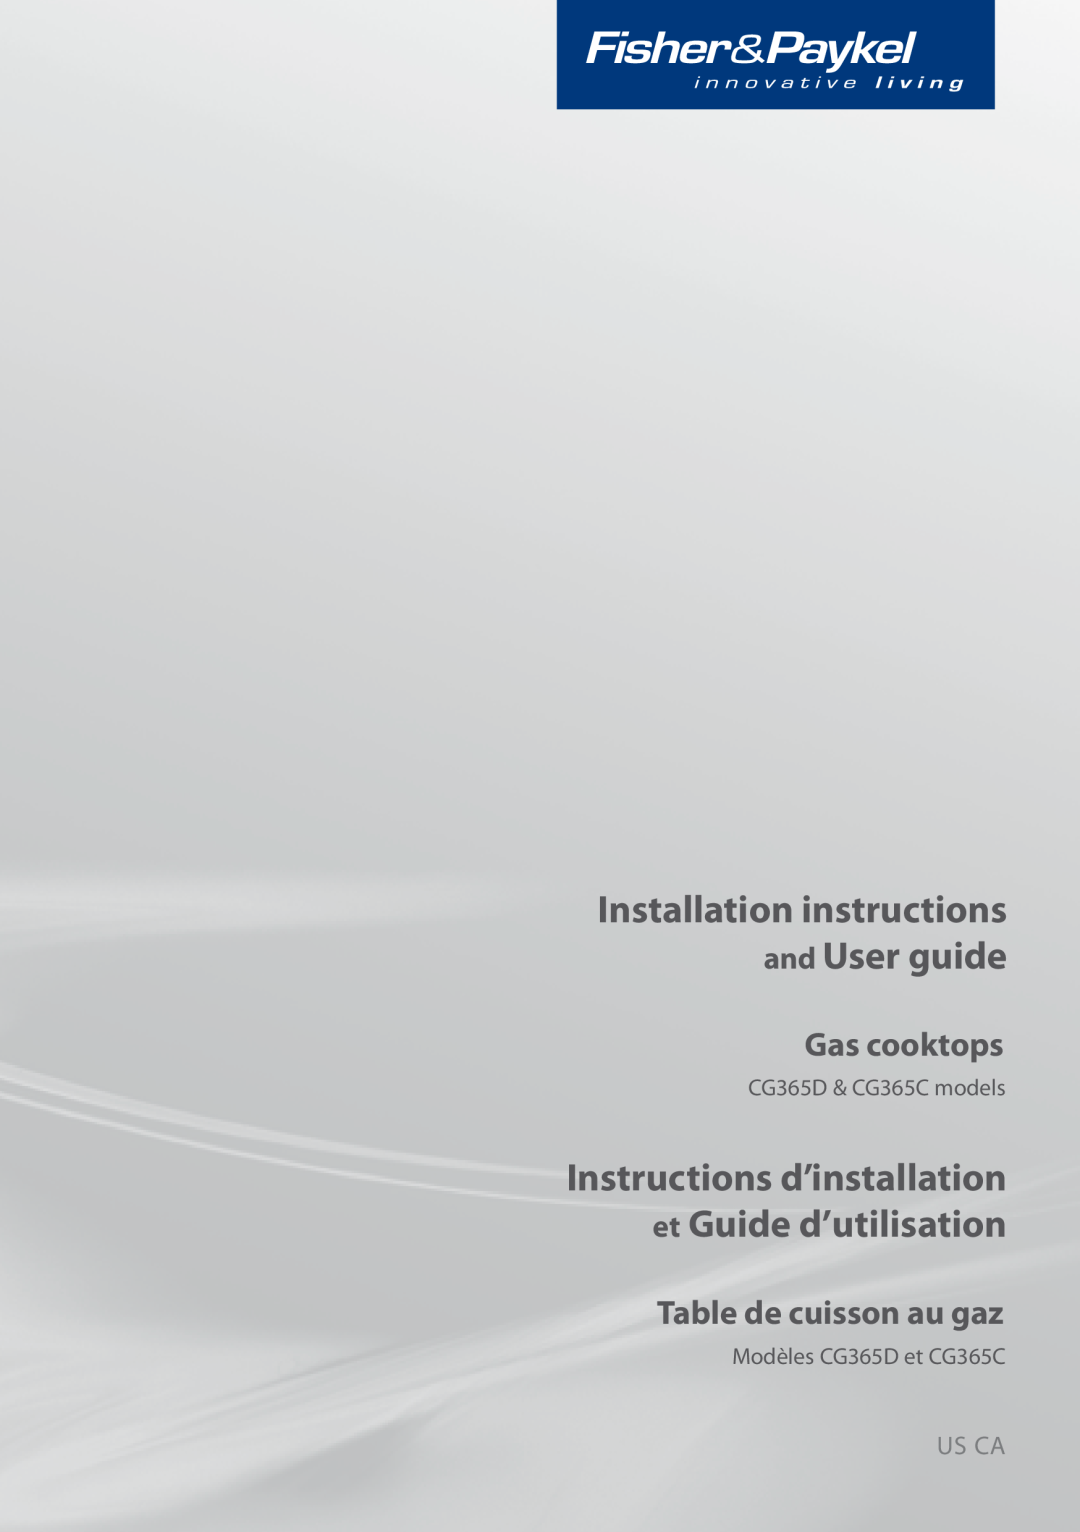 Fisher & Paykel installation instructions Installation Instructions, Gas cooktop, Us Ca, CG365D models, 590486B 